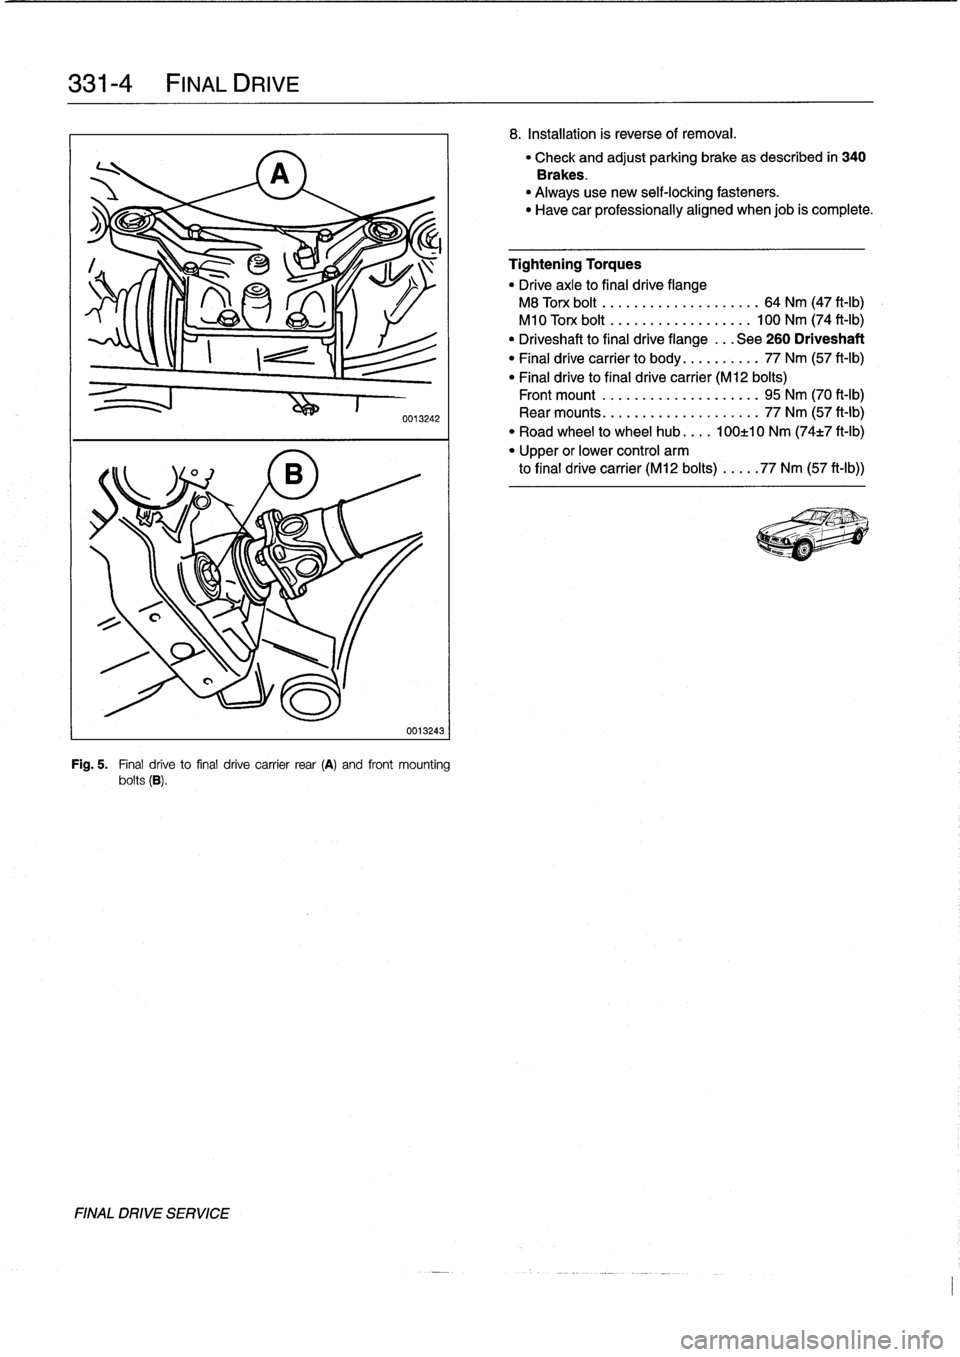 BMW 323i 1995 E36 Owners Manual 
331-
4

	

FINAL
DRIVE

FINAL
DRIVE
SERVICE

0013242
0013243

Fig
.
5
.

	

Final
drive
to
final
drive
carrier
rear
(A)
and
front
mounting
bolts
(B)
.

8
.
Installation
is
reverse
of
removal
.

"
Che